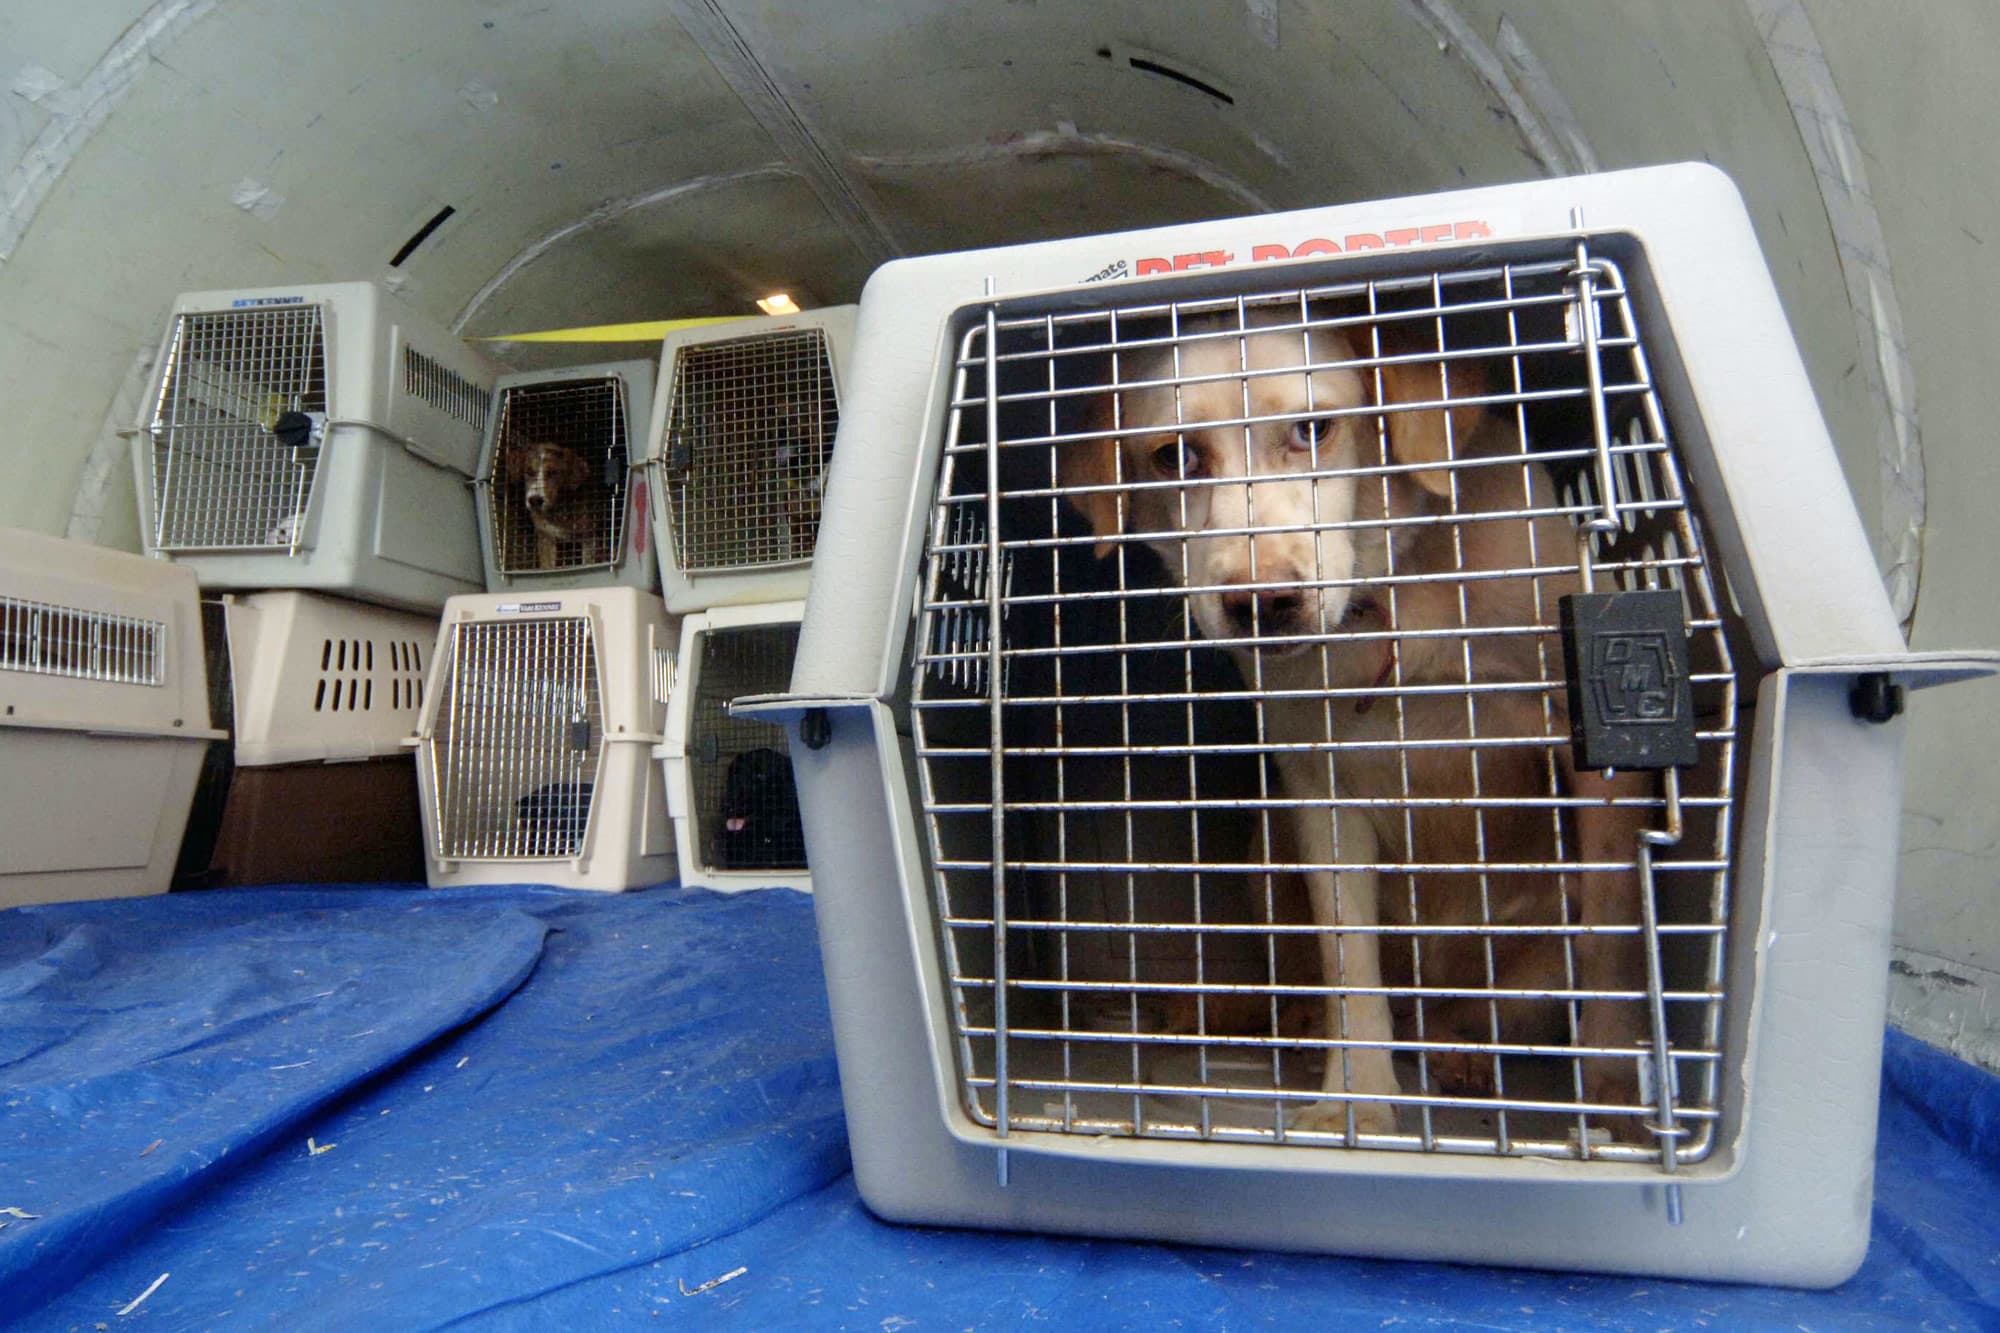 dogs traveling in airplane cargo